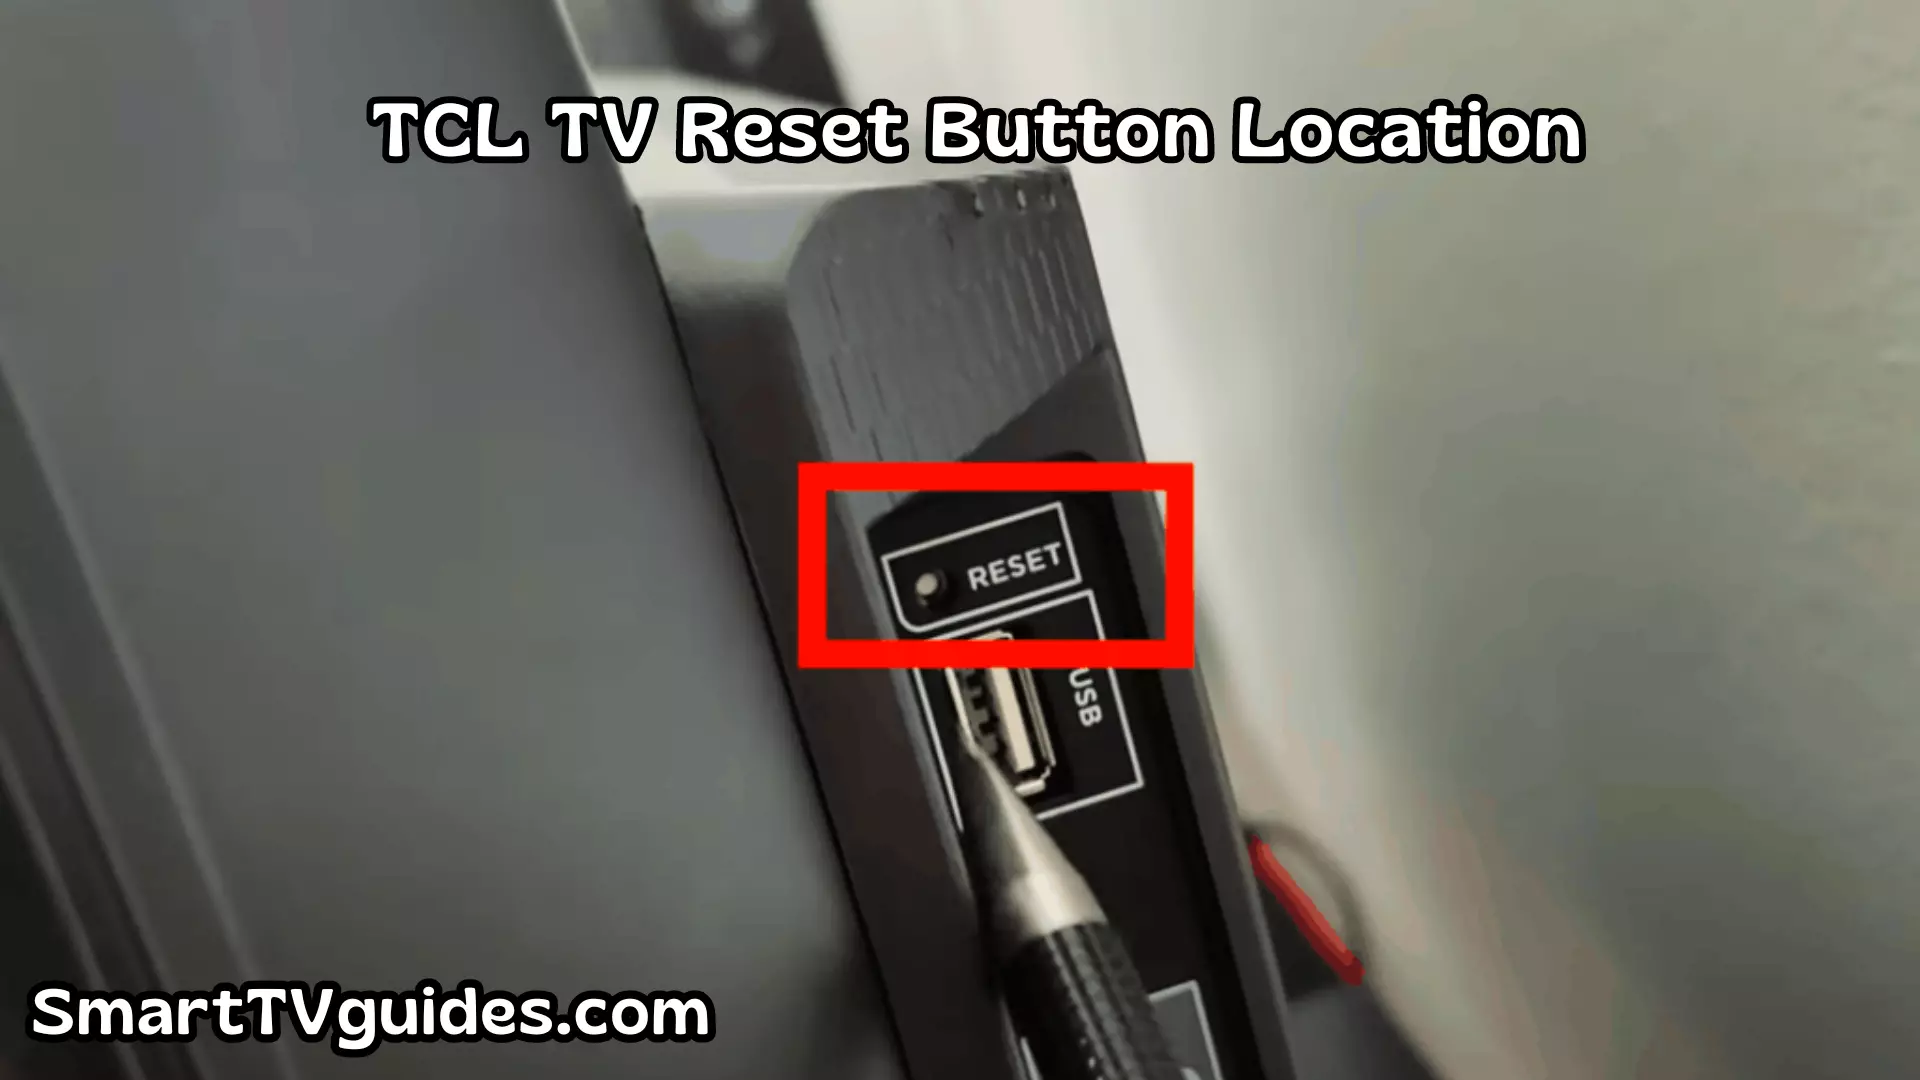 TCL TV Reset Button Location